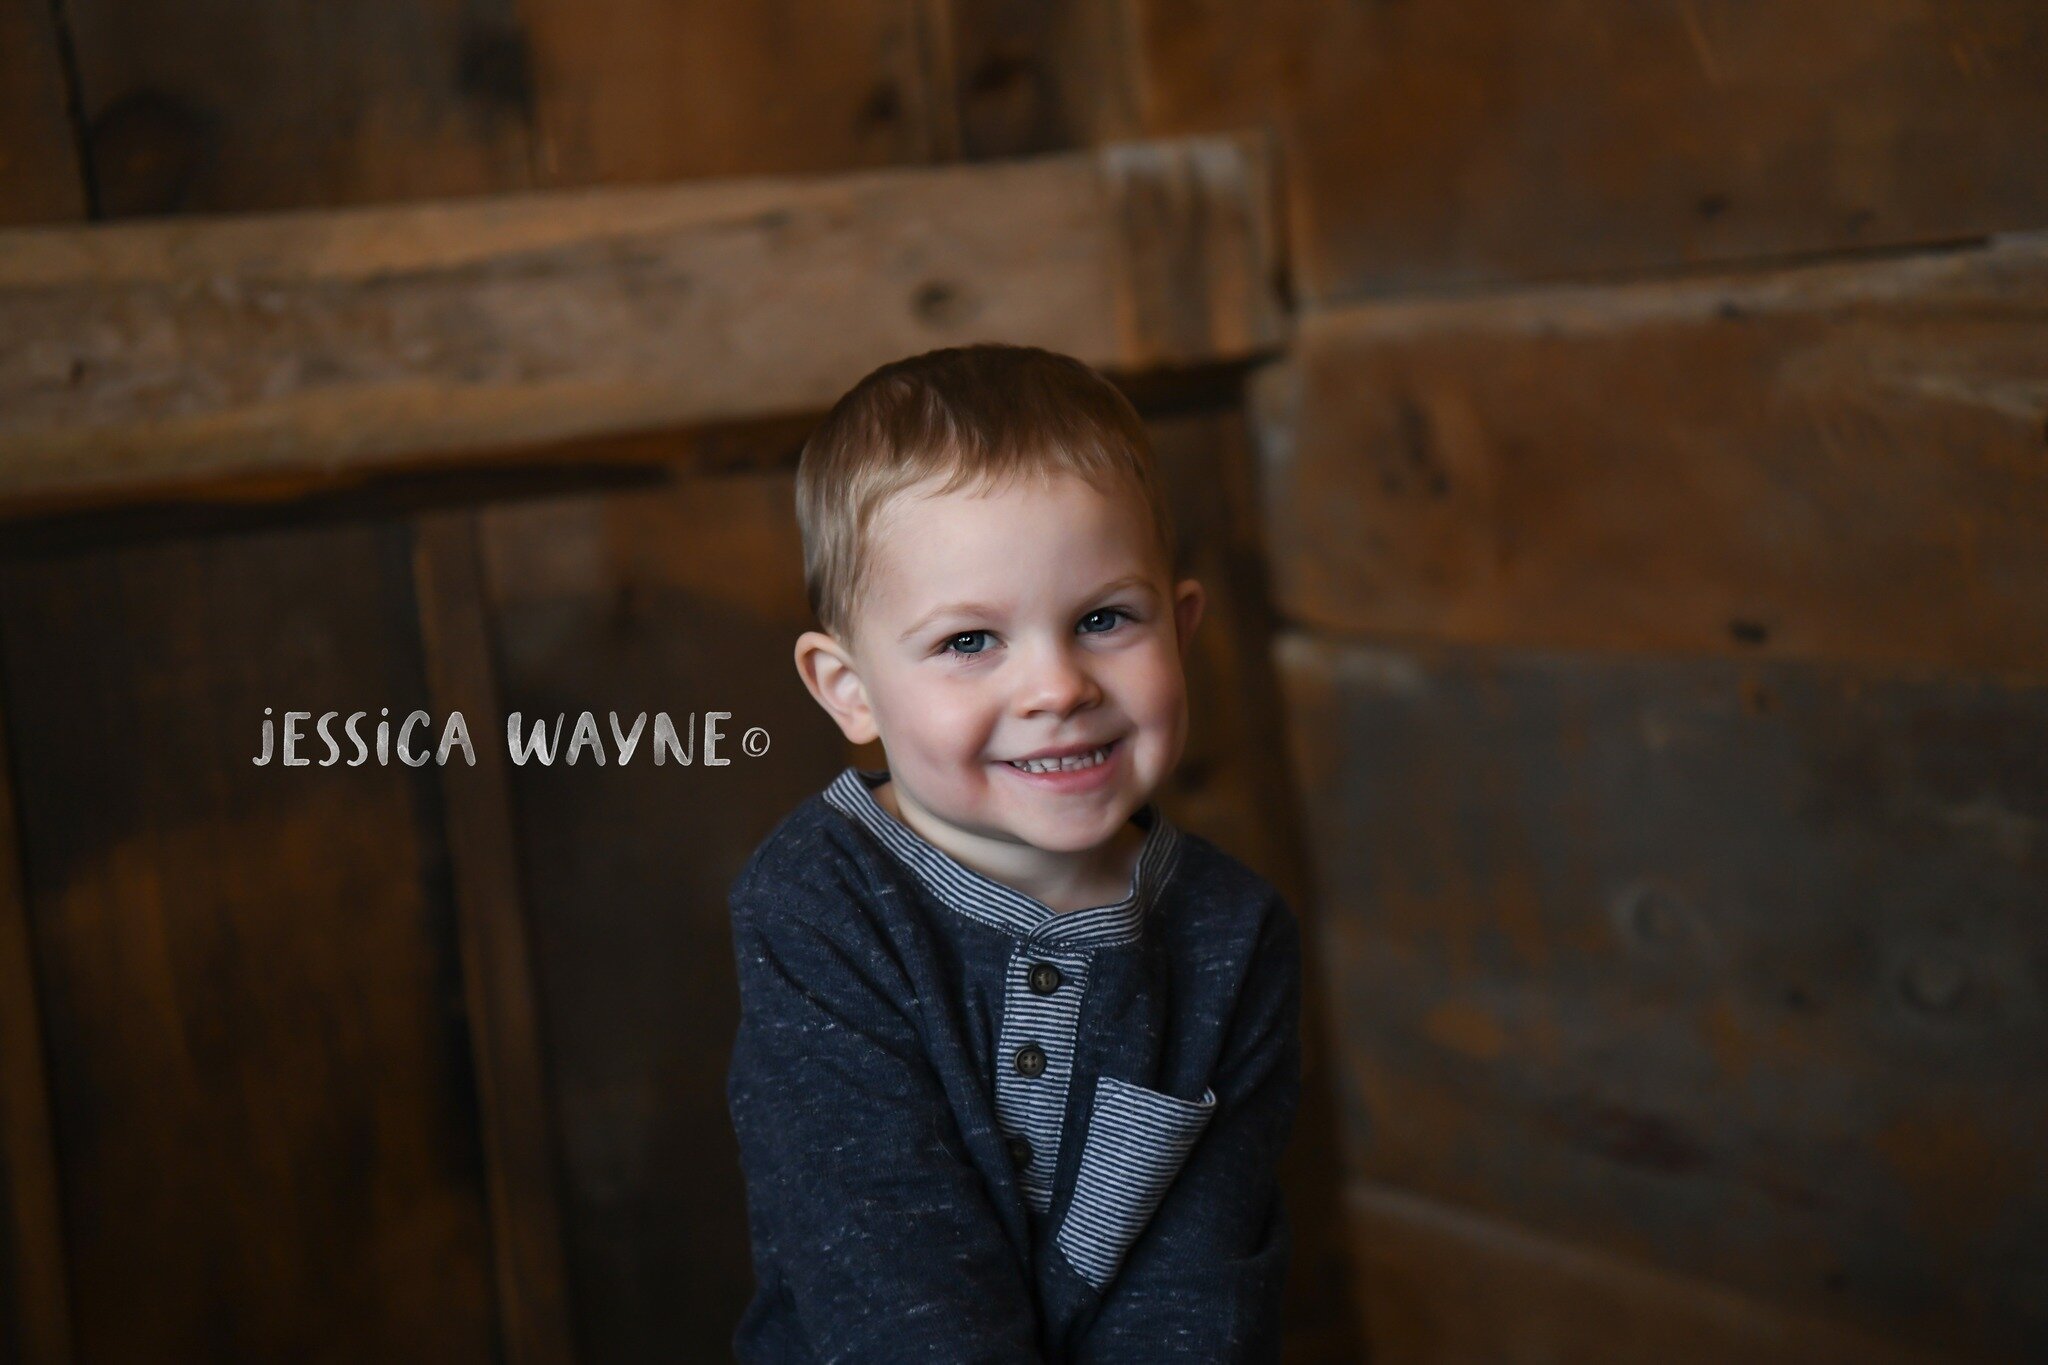 Giving Tuesday! Who wants to win a FREE photo shoot from Jessica Wayne Photography?!?! 

To enter: 
1. Like this post
2. Tag a friend or friends
3. Share this post

It really is that easy! When you do all 3 you will be entered into the drawing! Drawi